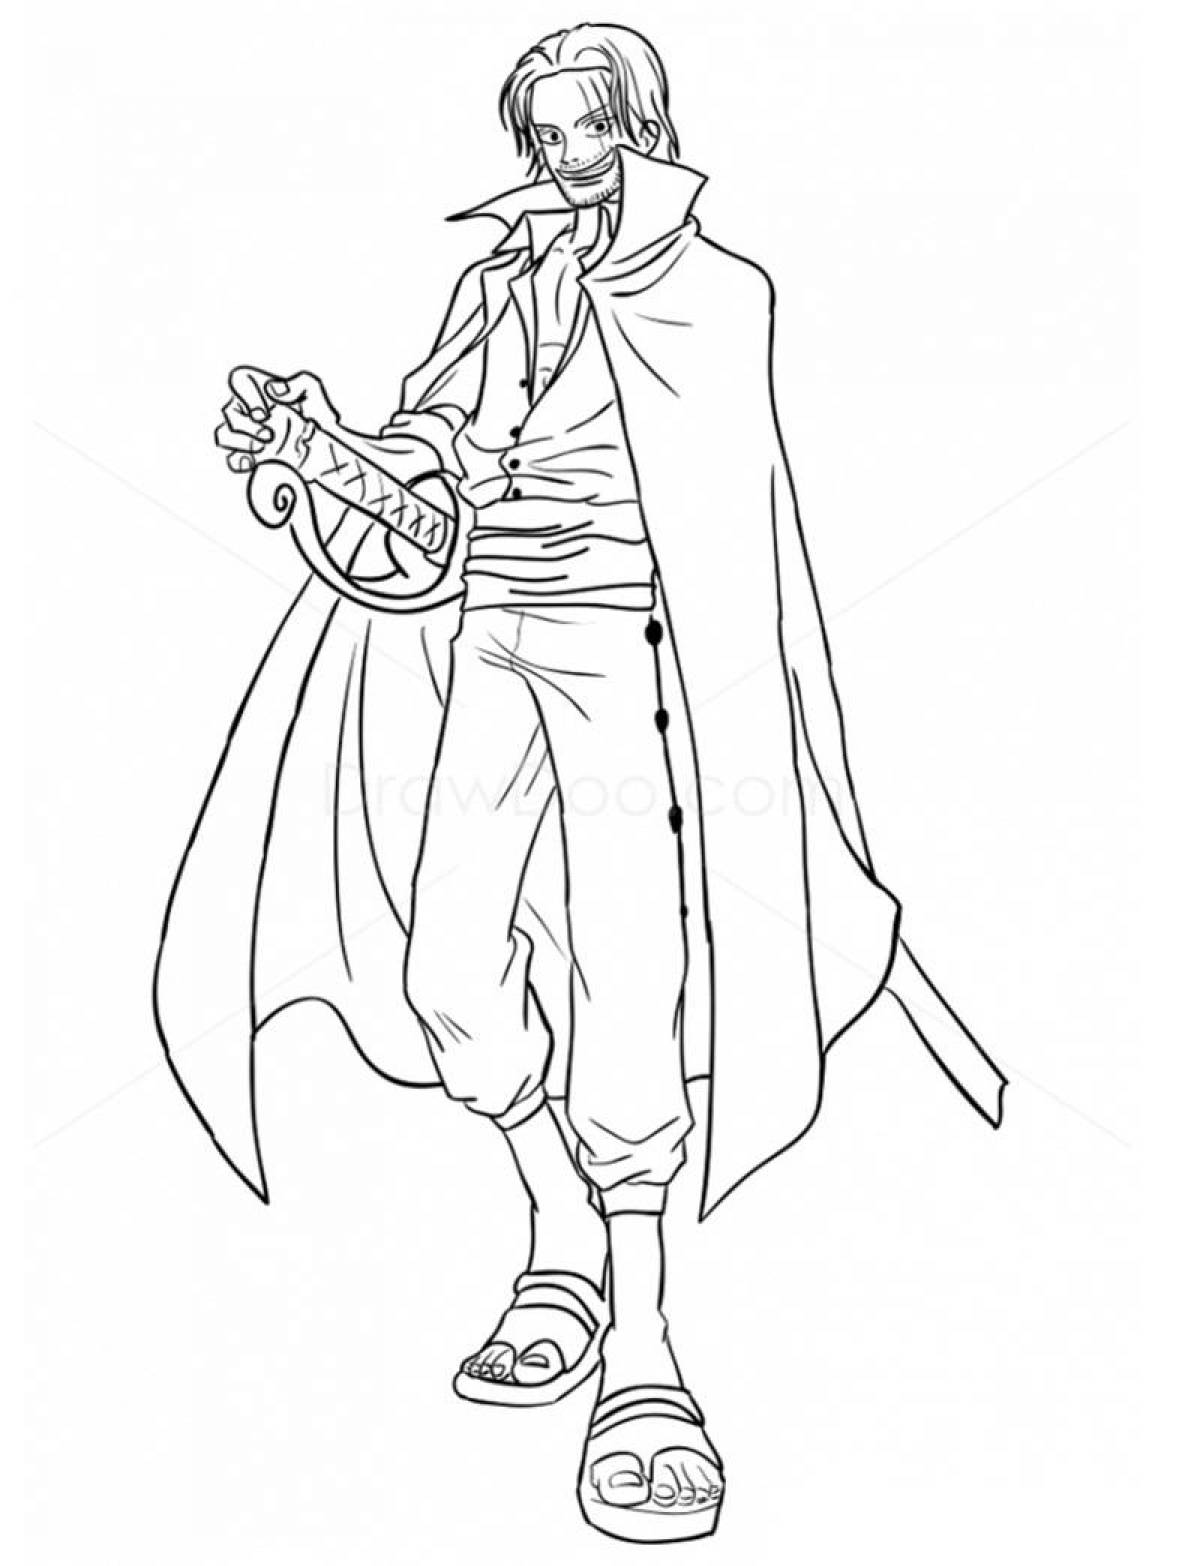 Colorful one piece coloring page